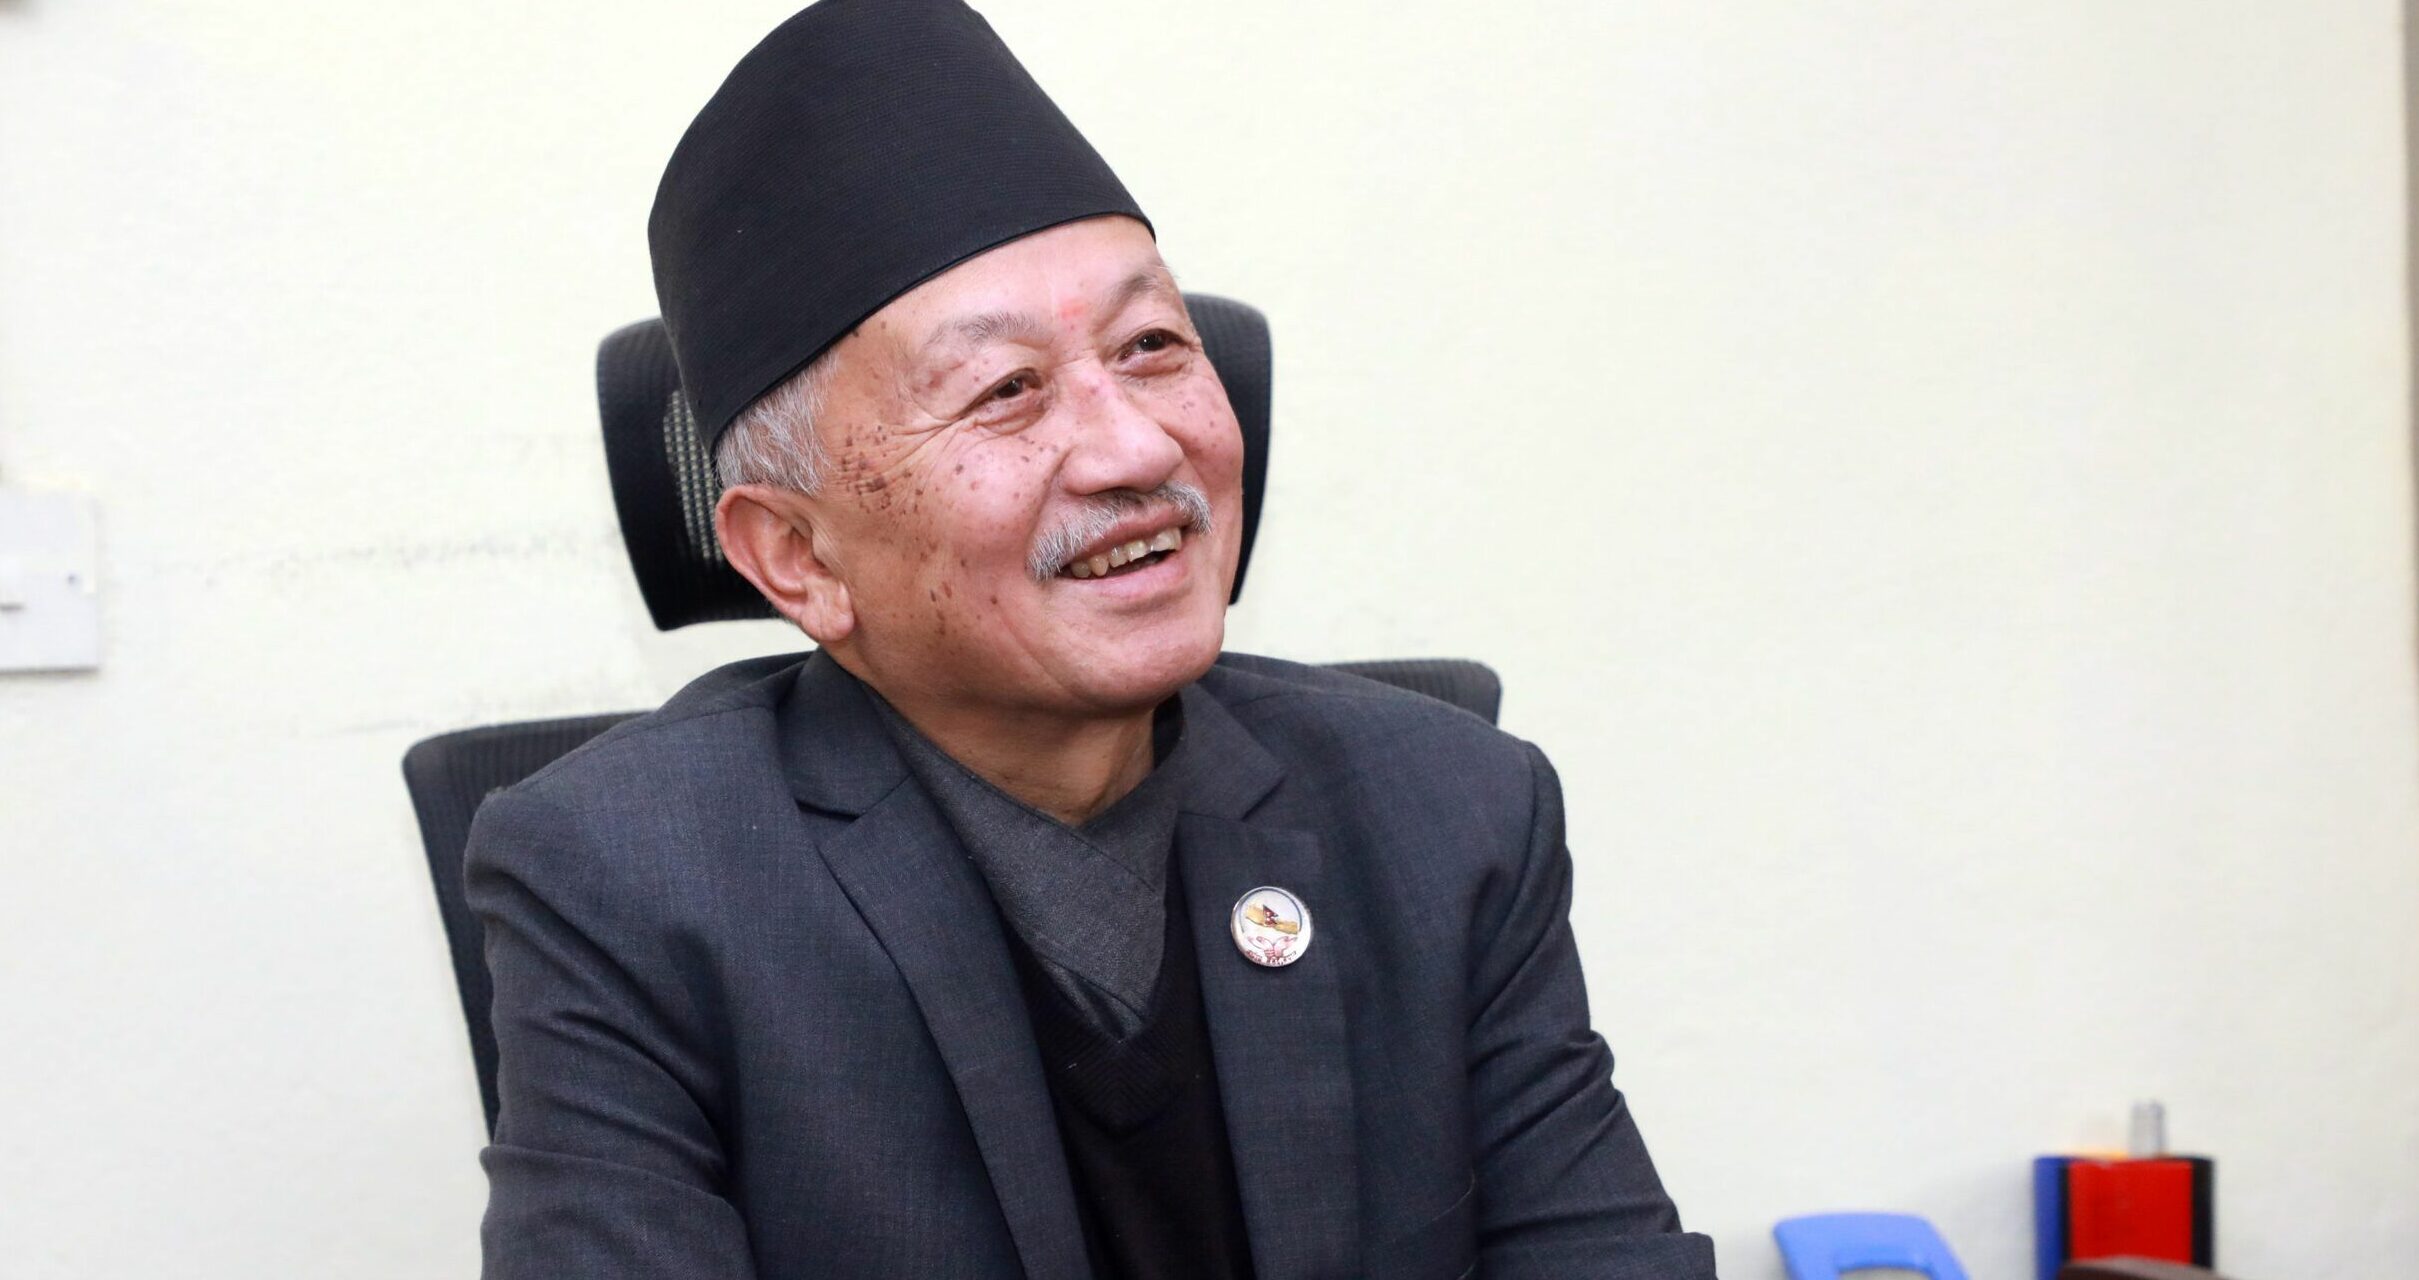 My efforts would be to become people’s President – Presidential candidate Nembang